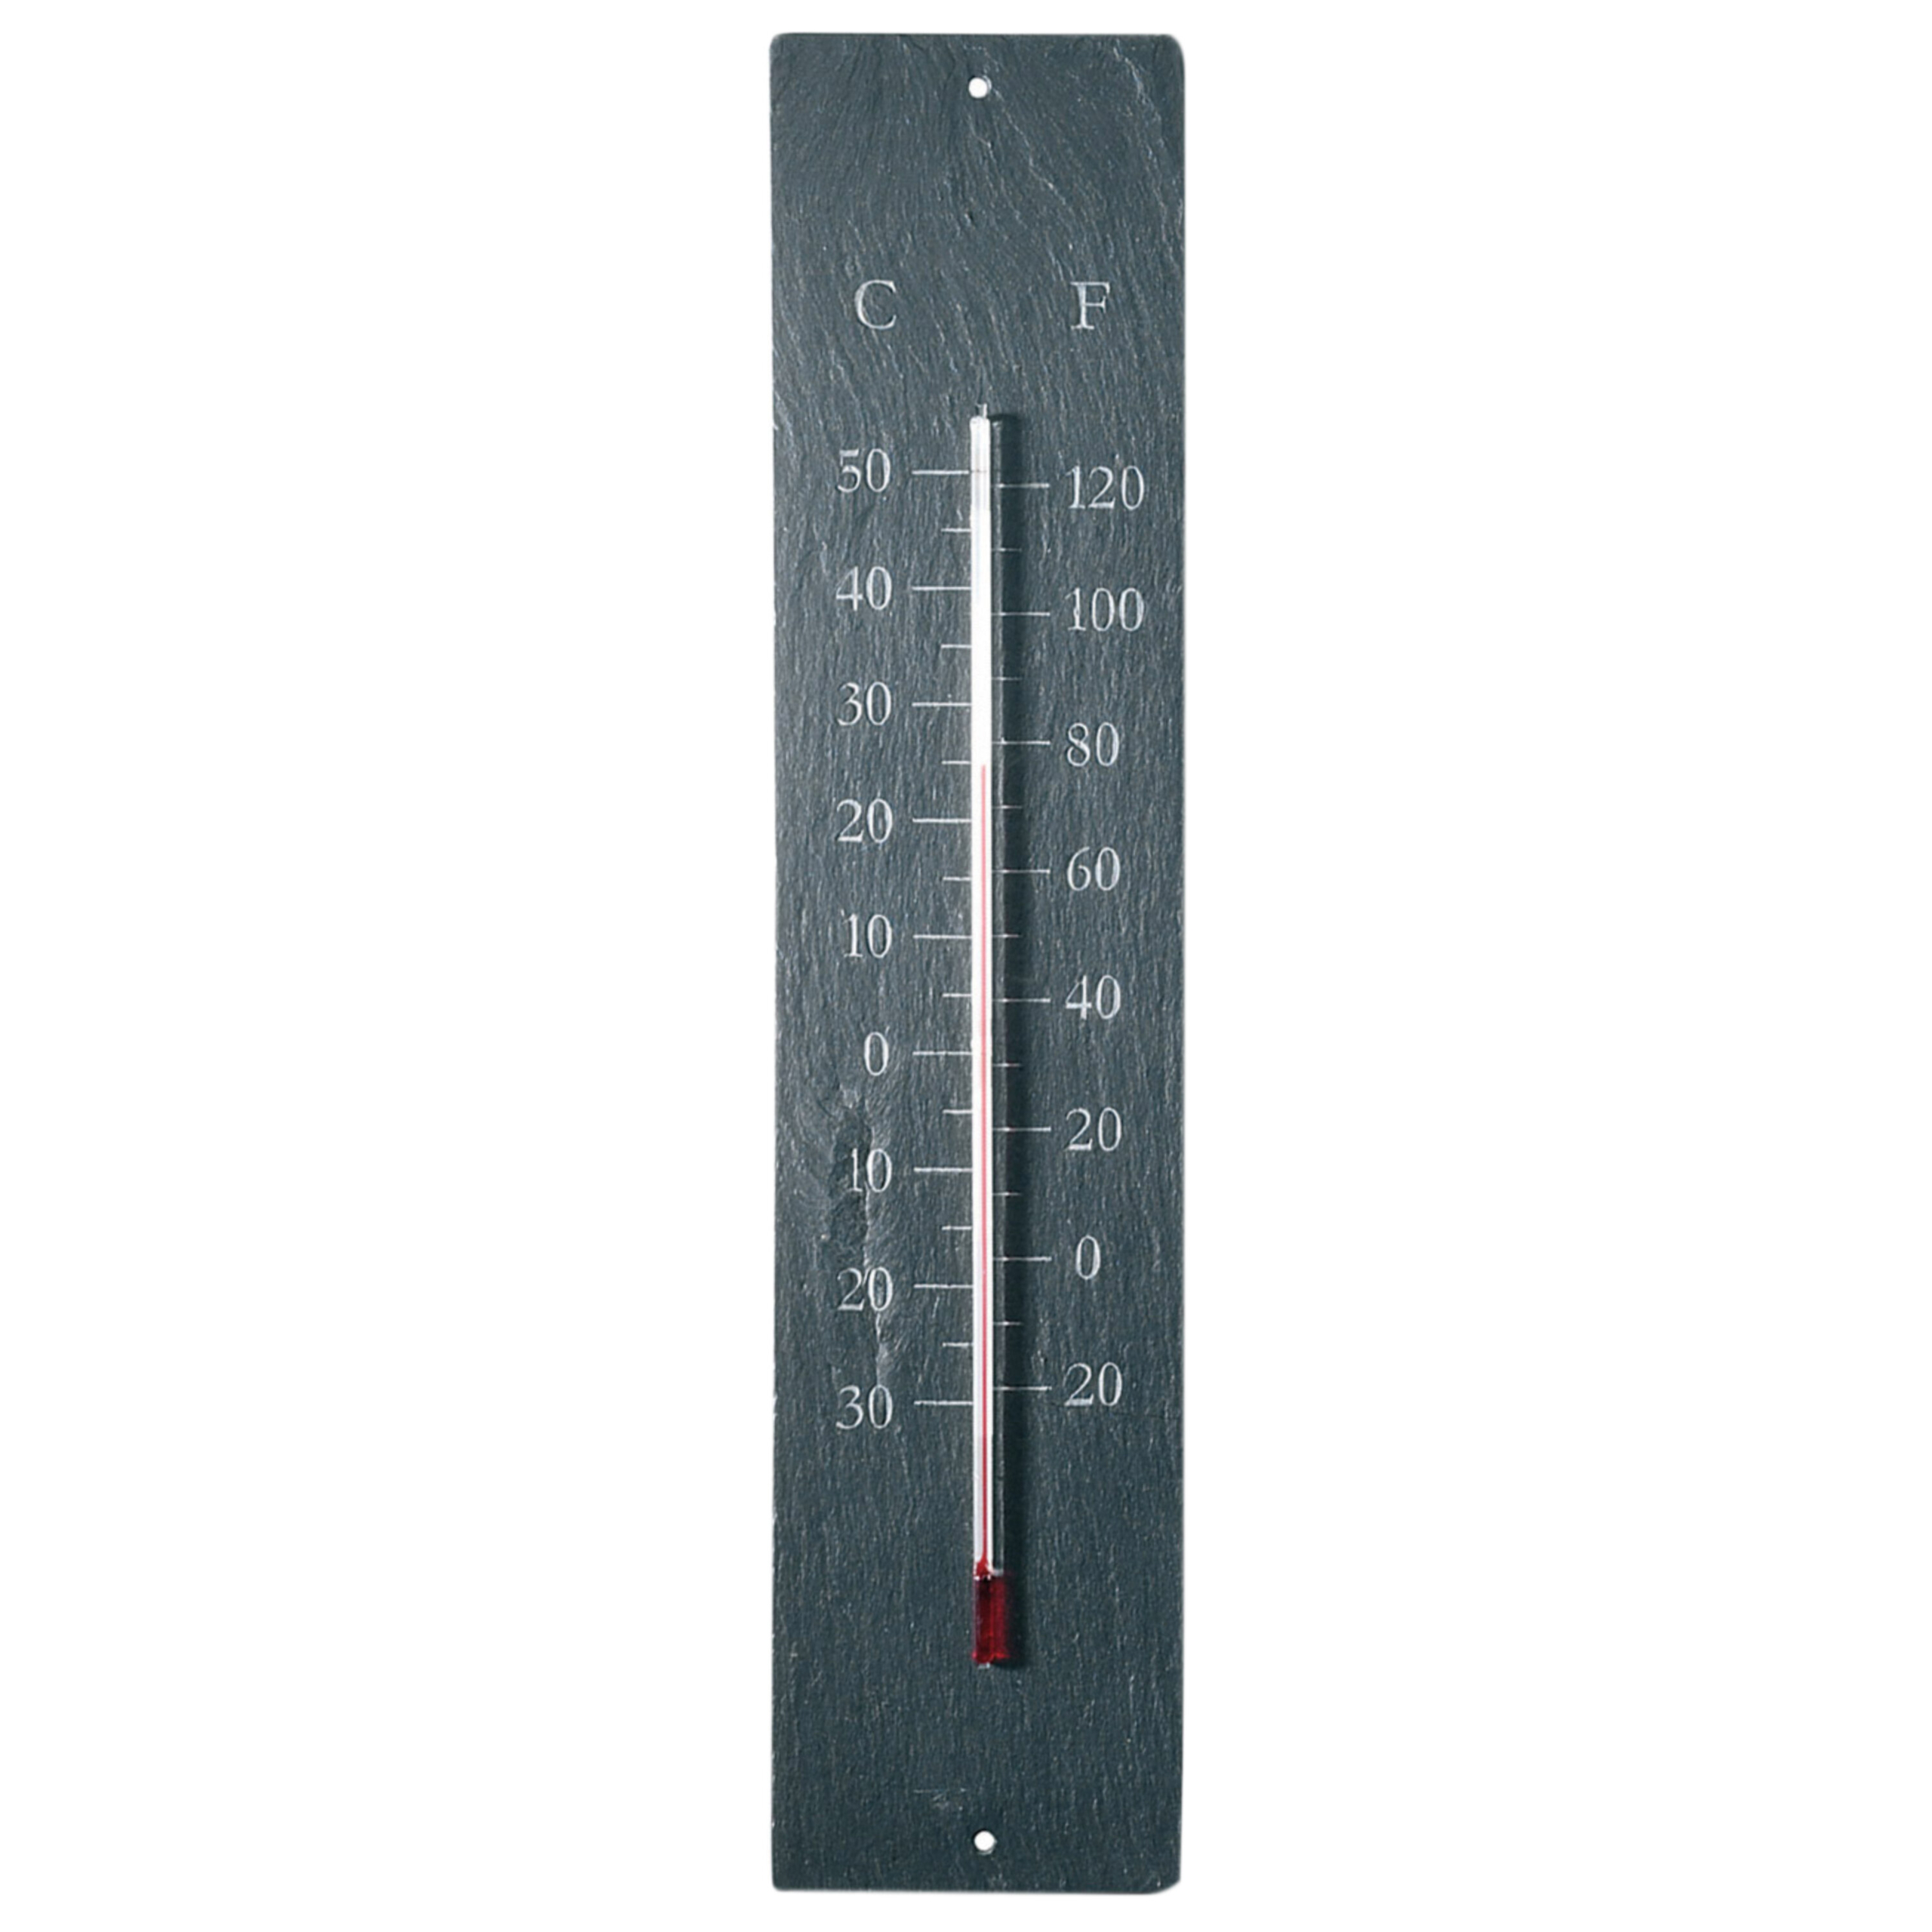 15" x 2.5" Big & Bold Inside or Outside Thermometer Garden Thermometer E1